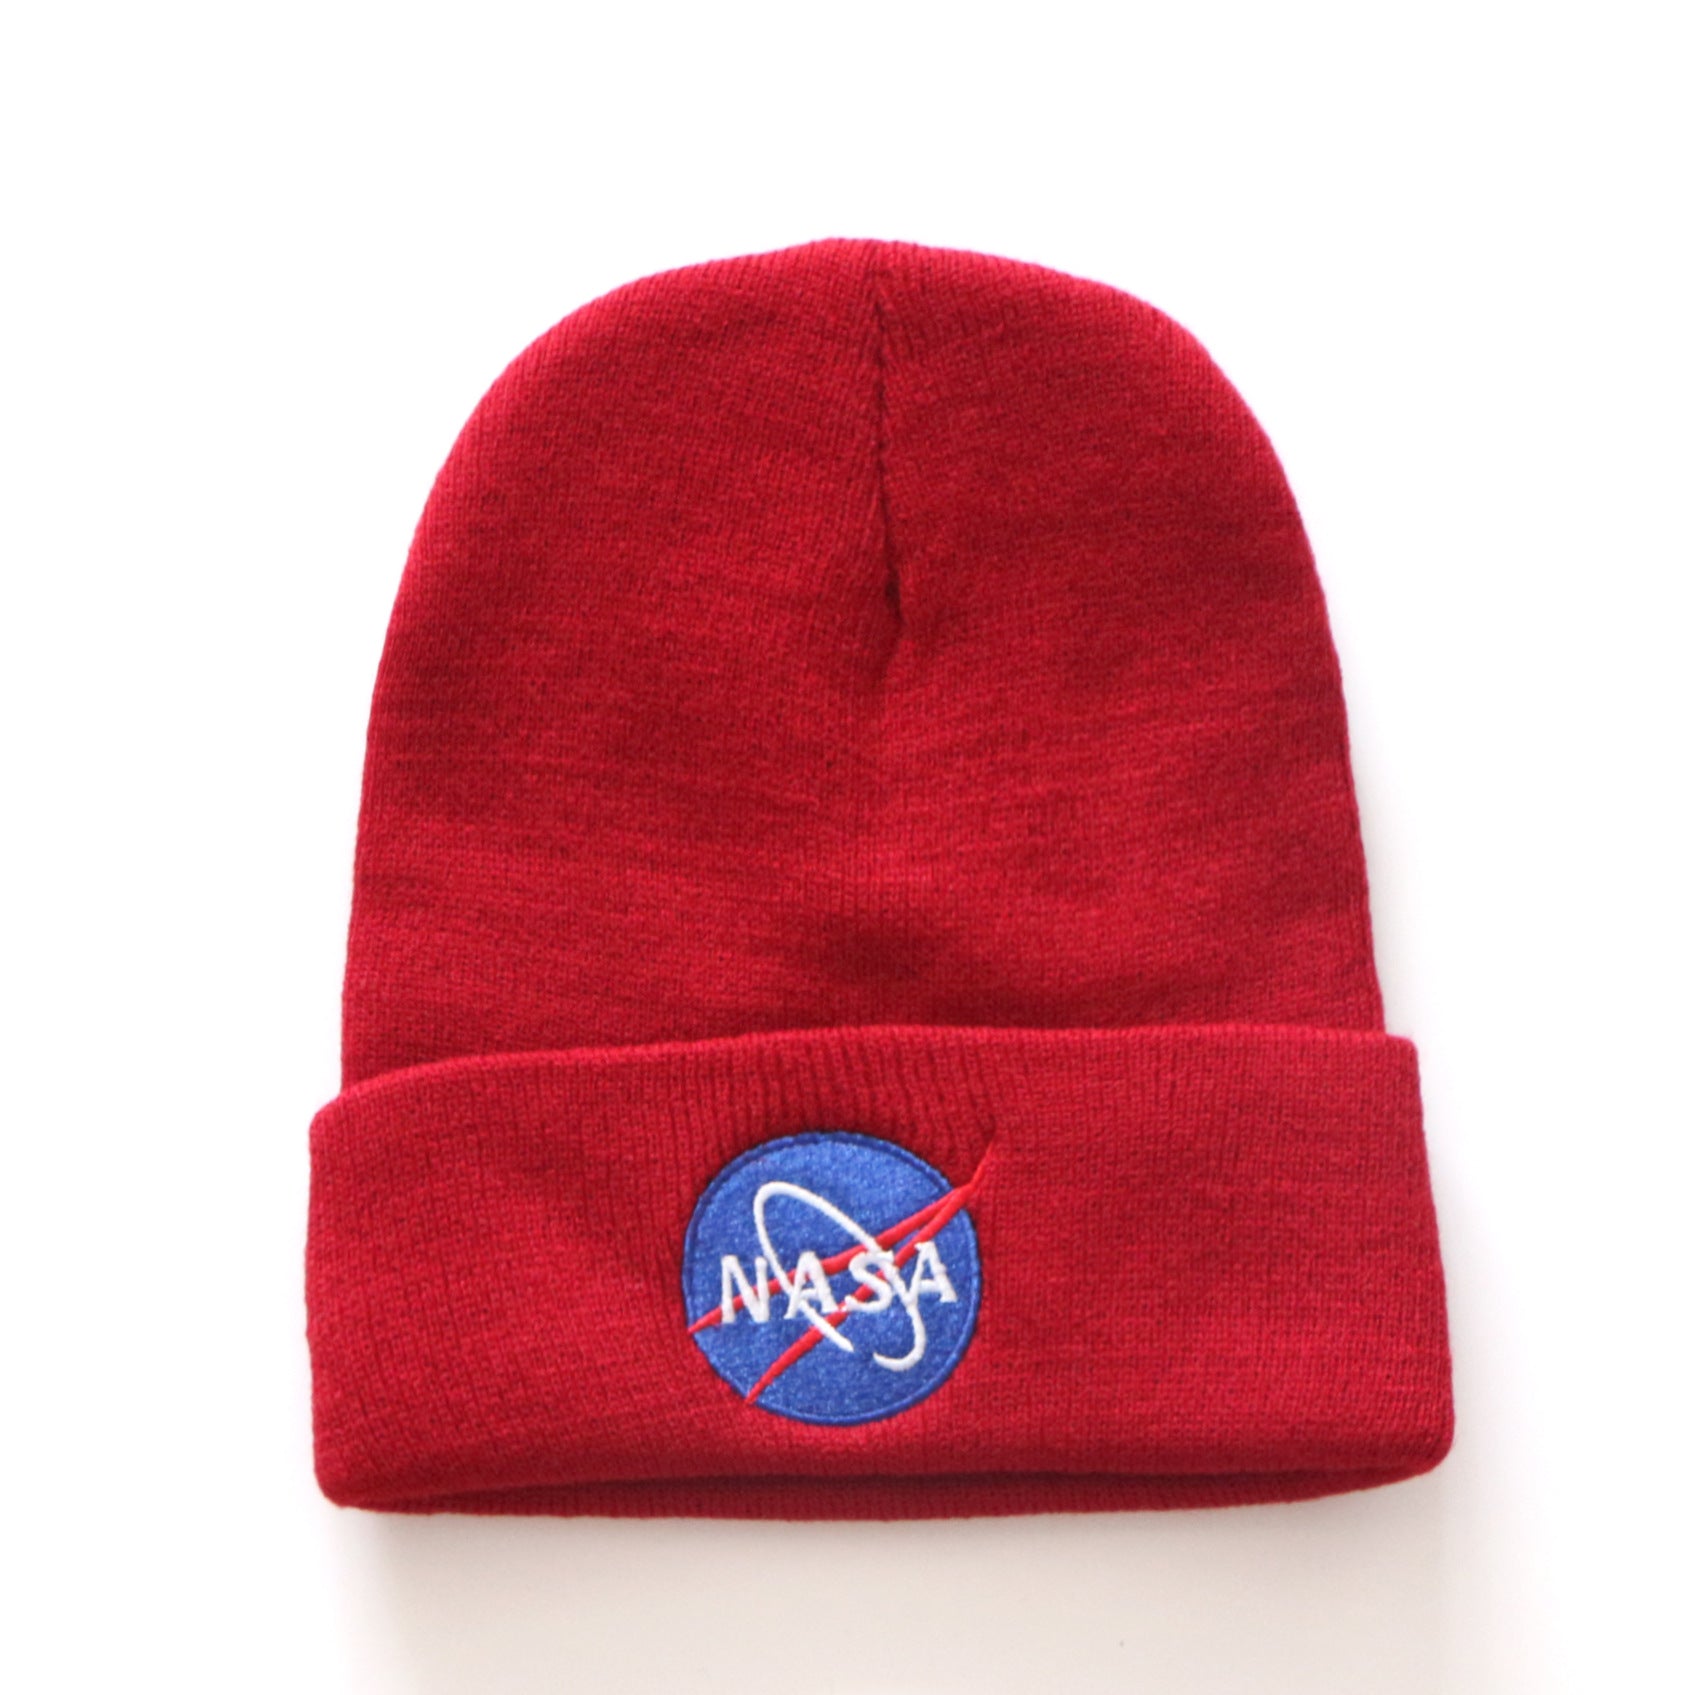 NASA Embroidered Knitted Beanie